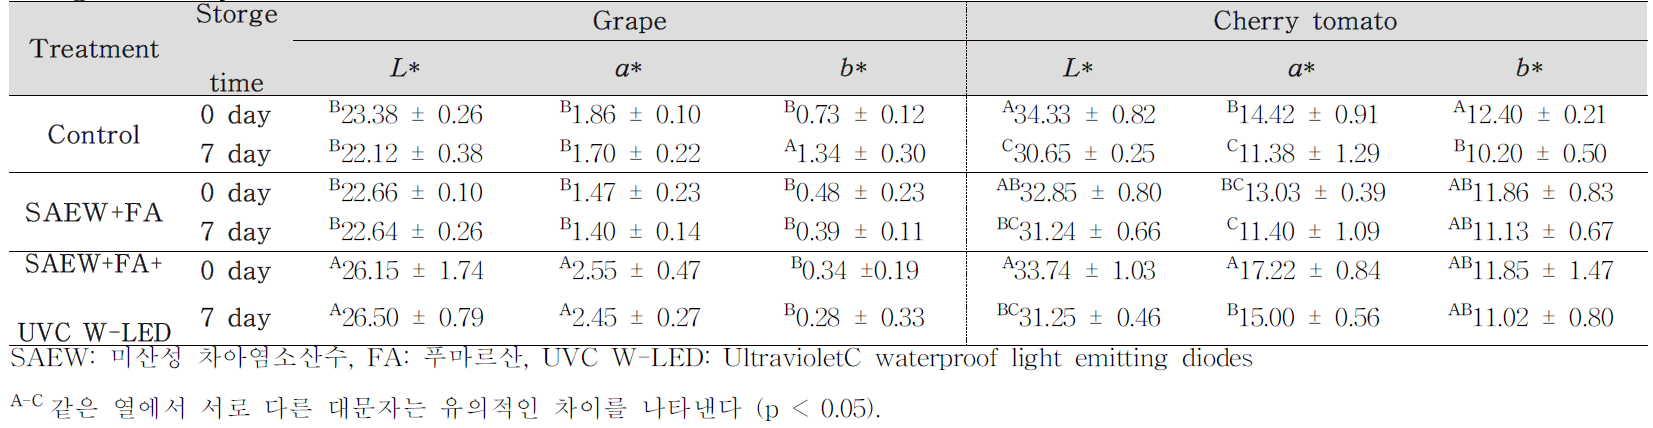 Effectiveness of disinfection treatments on color parameters (L*, a*, and b*) in grape and cherry tomato after storage for 7 days at 15°C